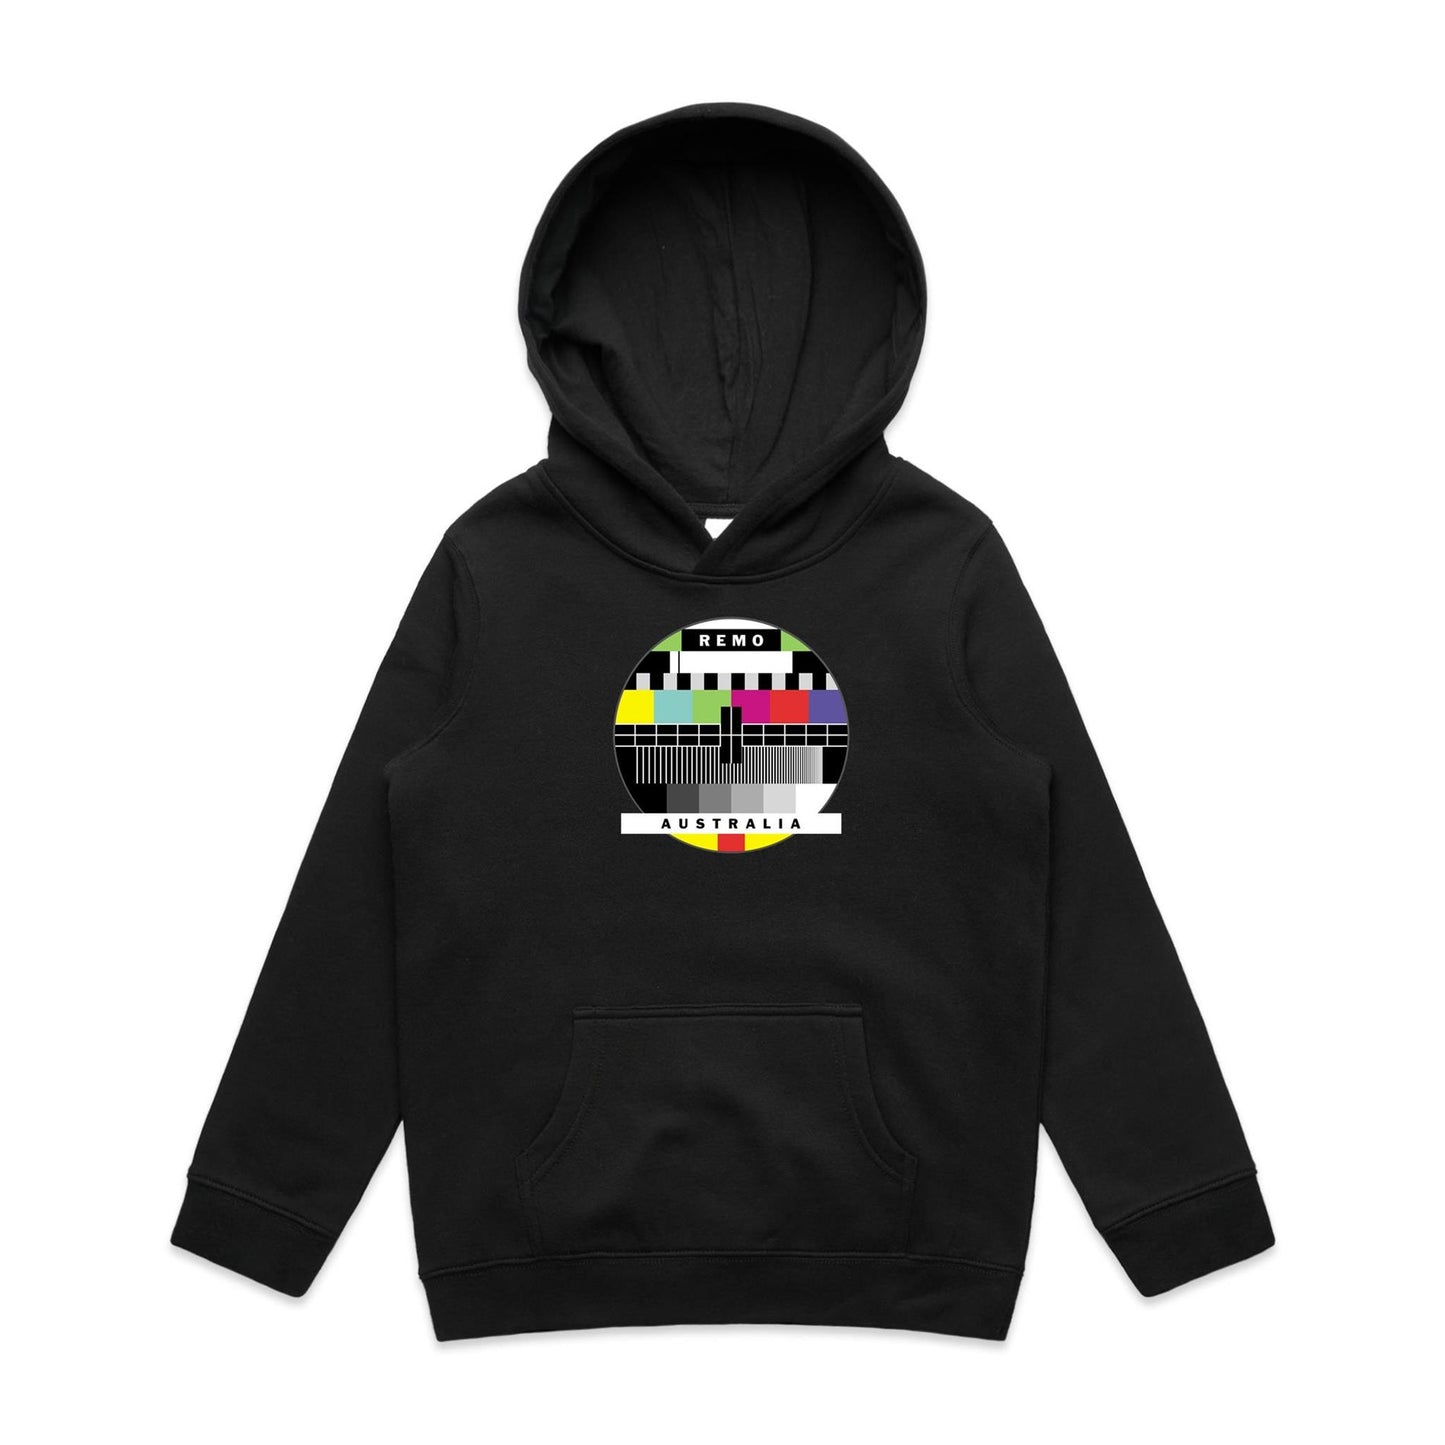 REMO TV Hoodies for Kids